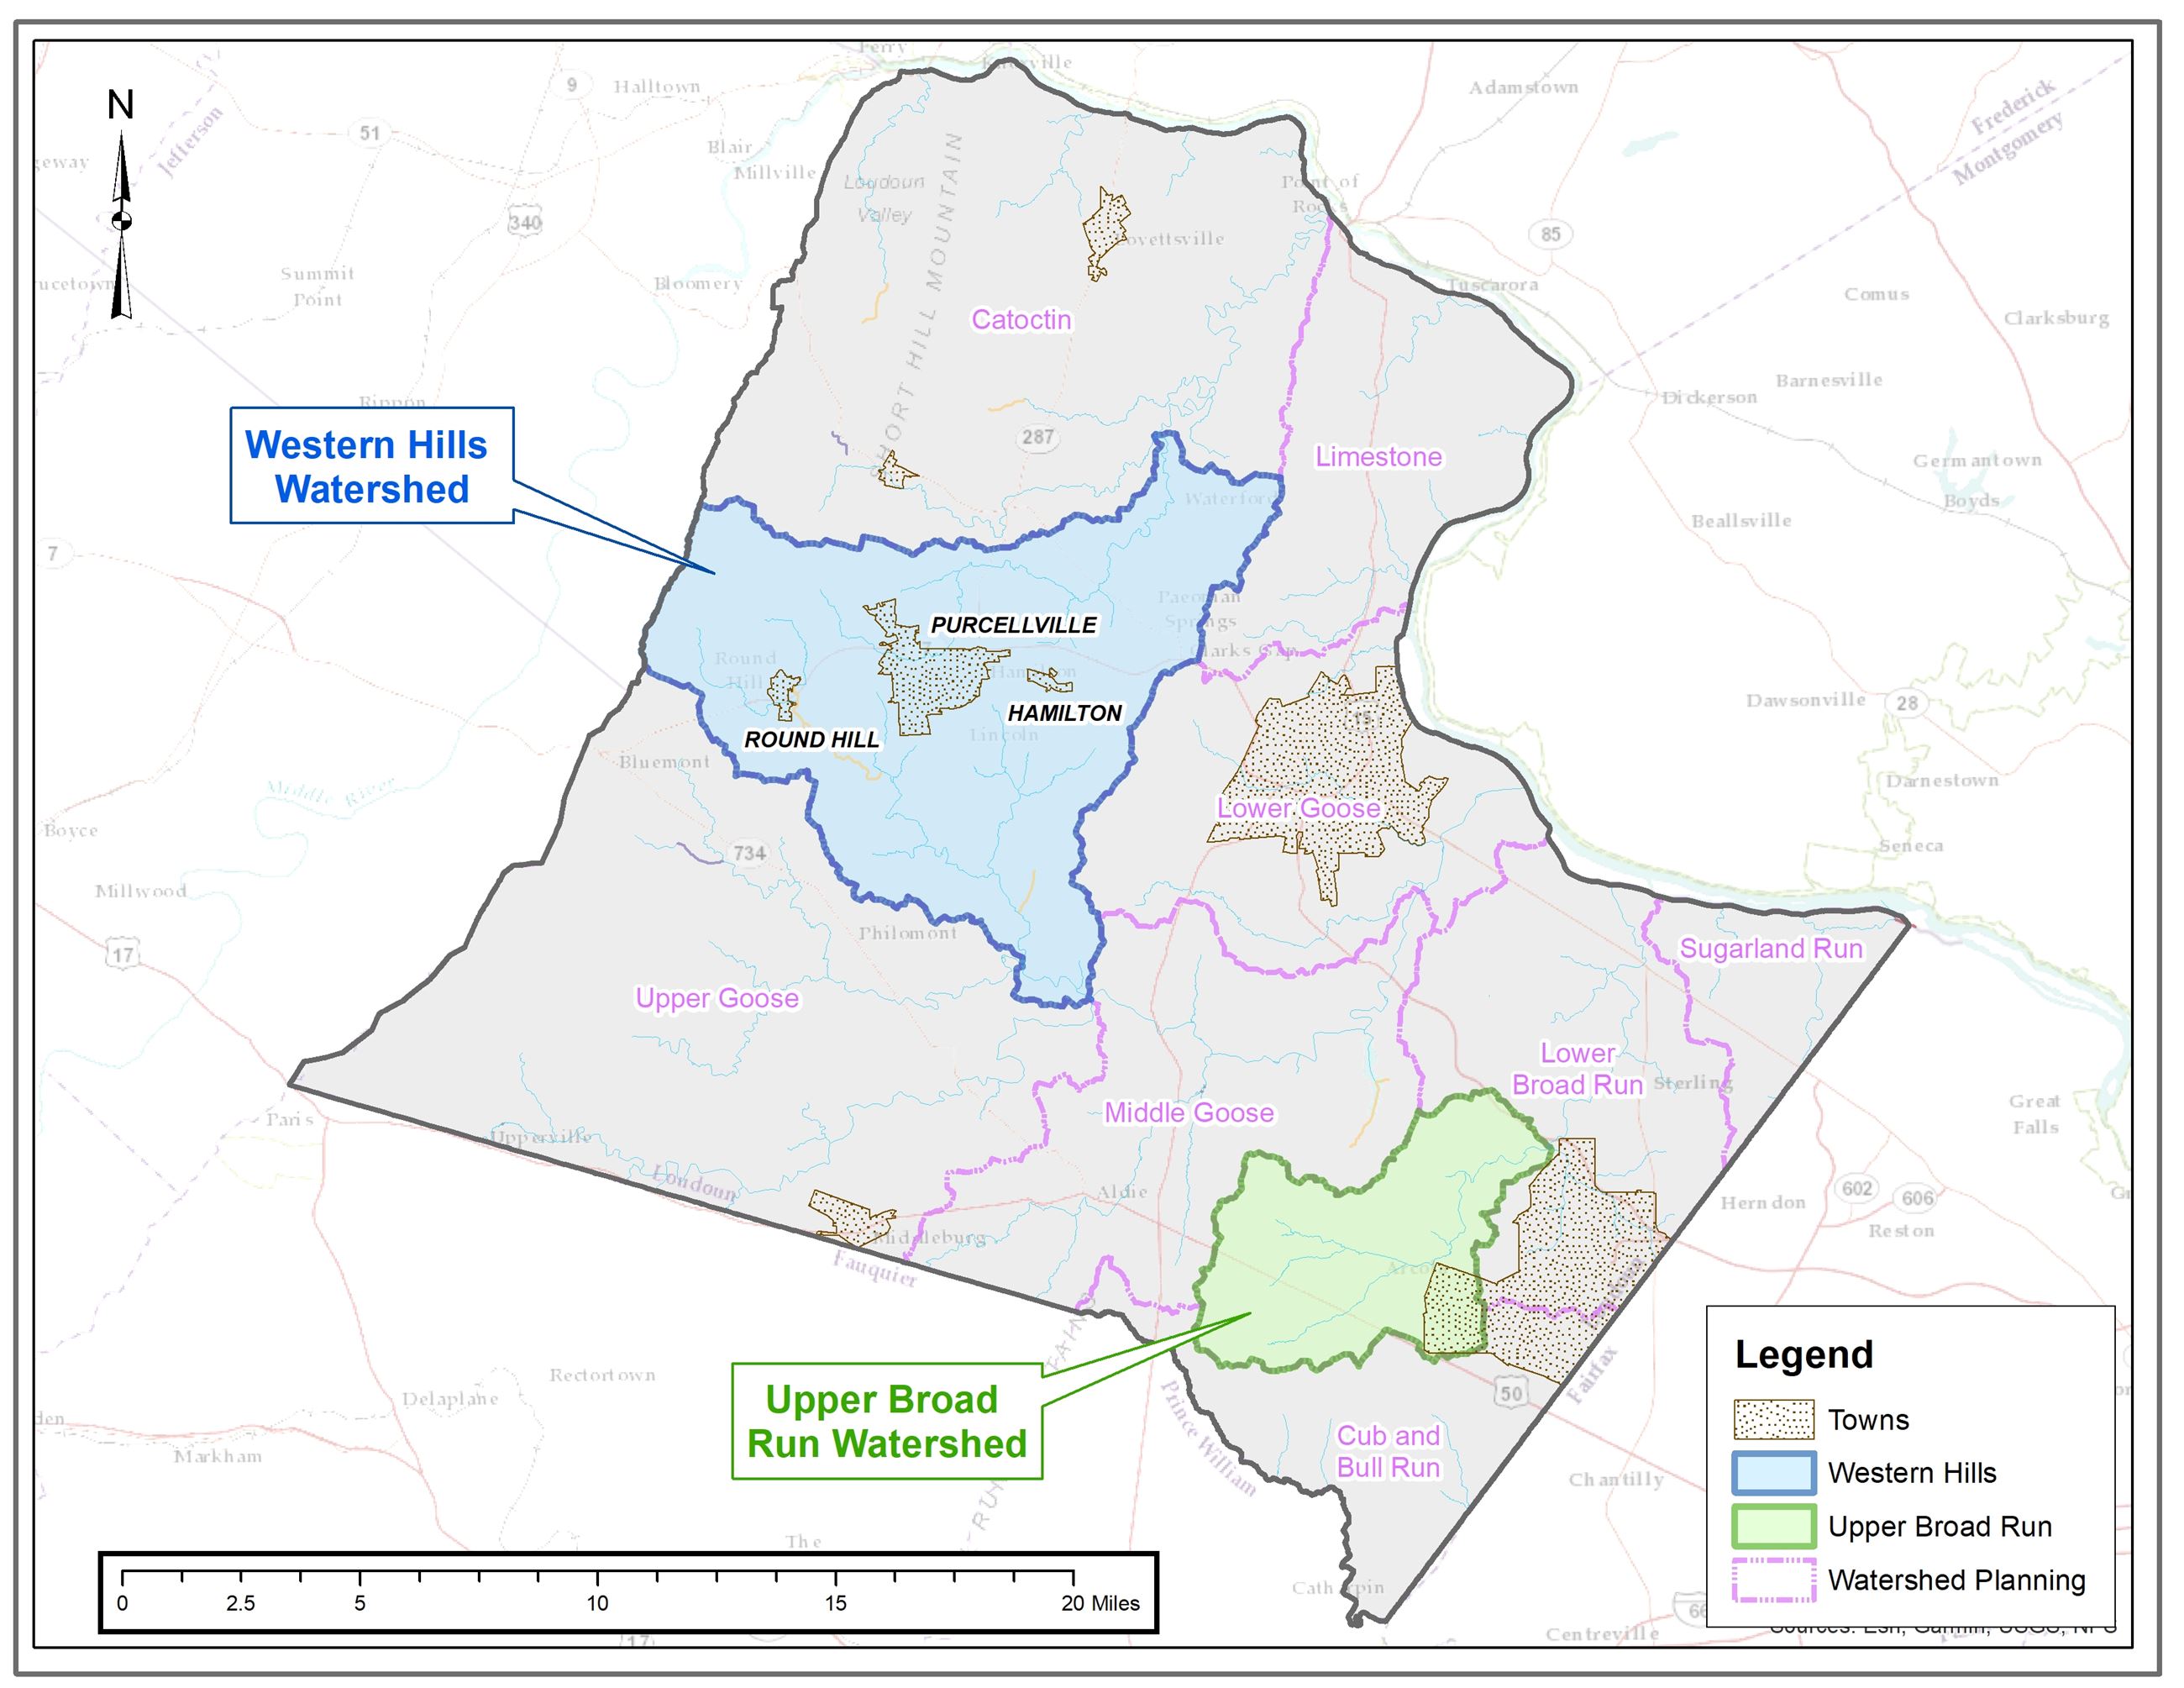 Link to larger version of Loudoun County Watershed Map